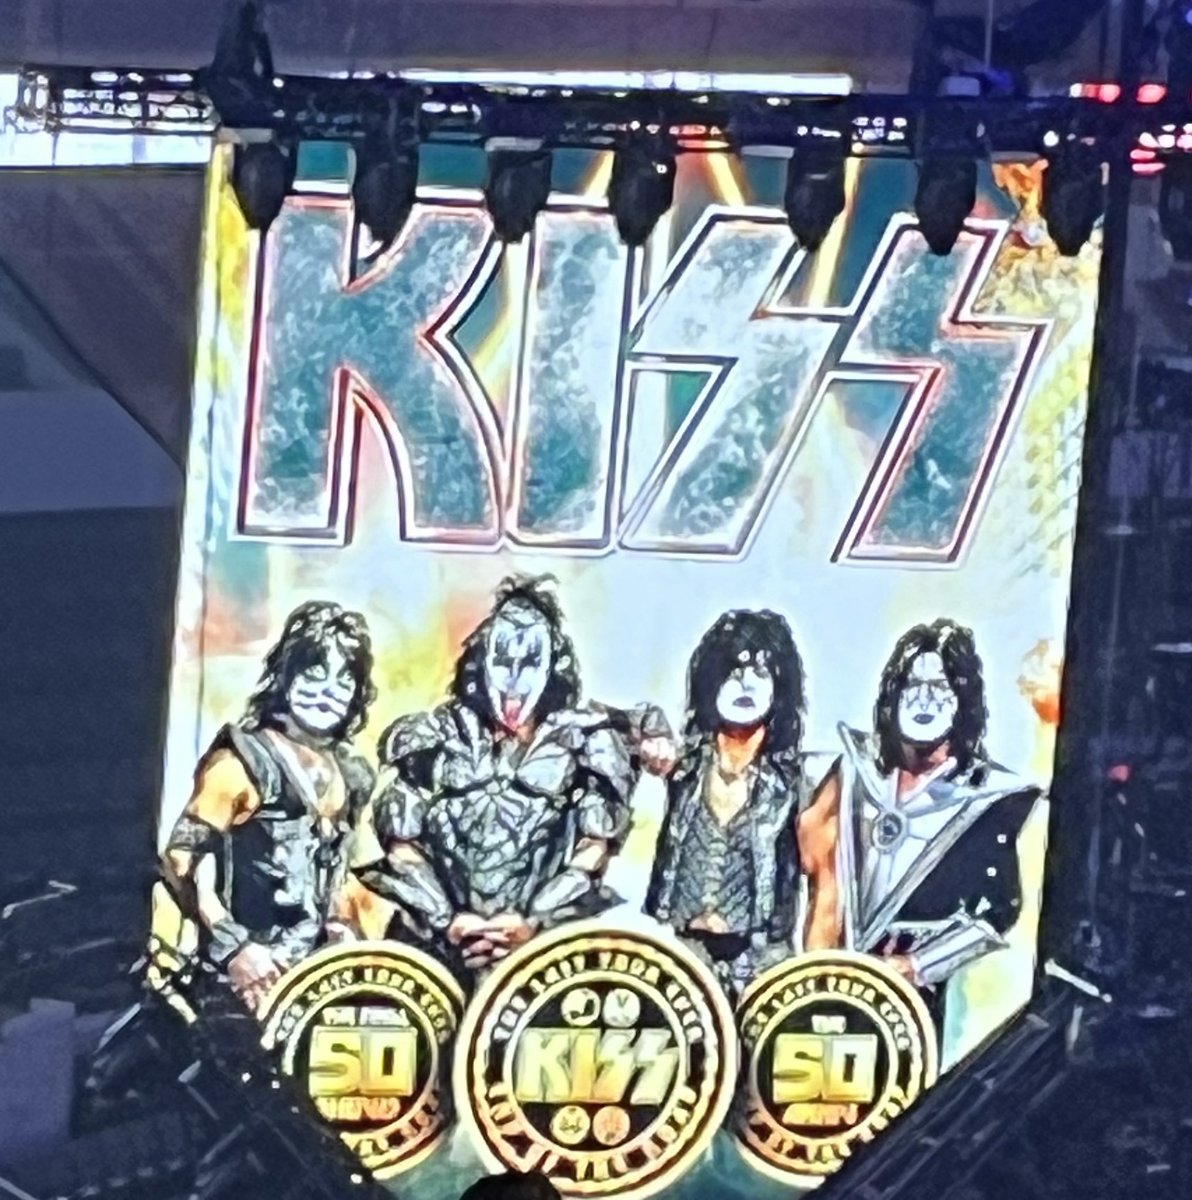 Getting ready to rock out to kiss